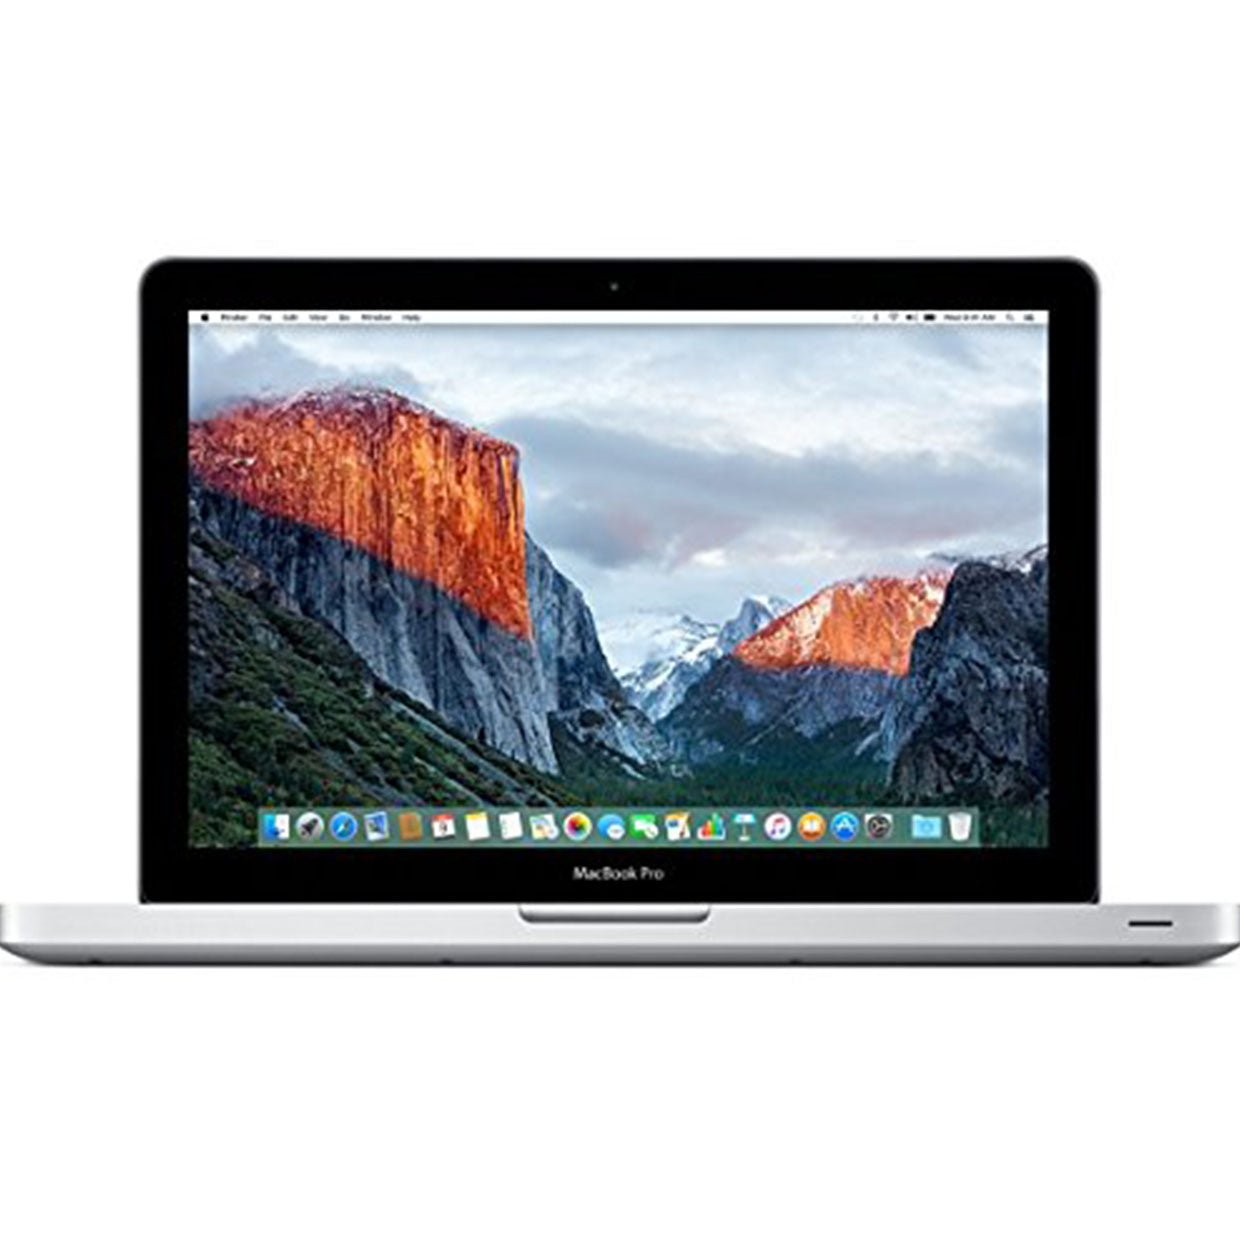 Apple Macbook Pro Laptop | A1278 2012 | 13.3 Inches Display | Core i7 | 8GB RAM | 256GB SSD